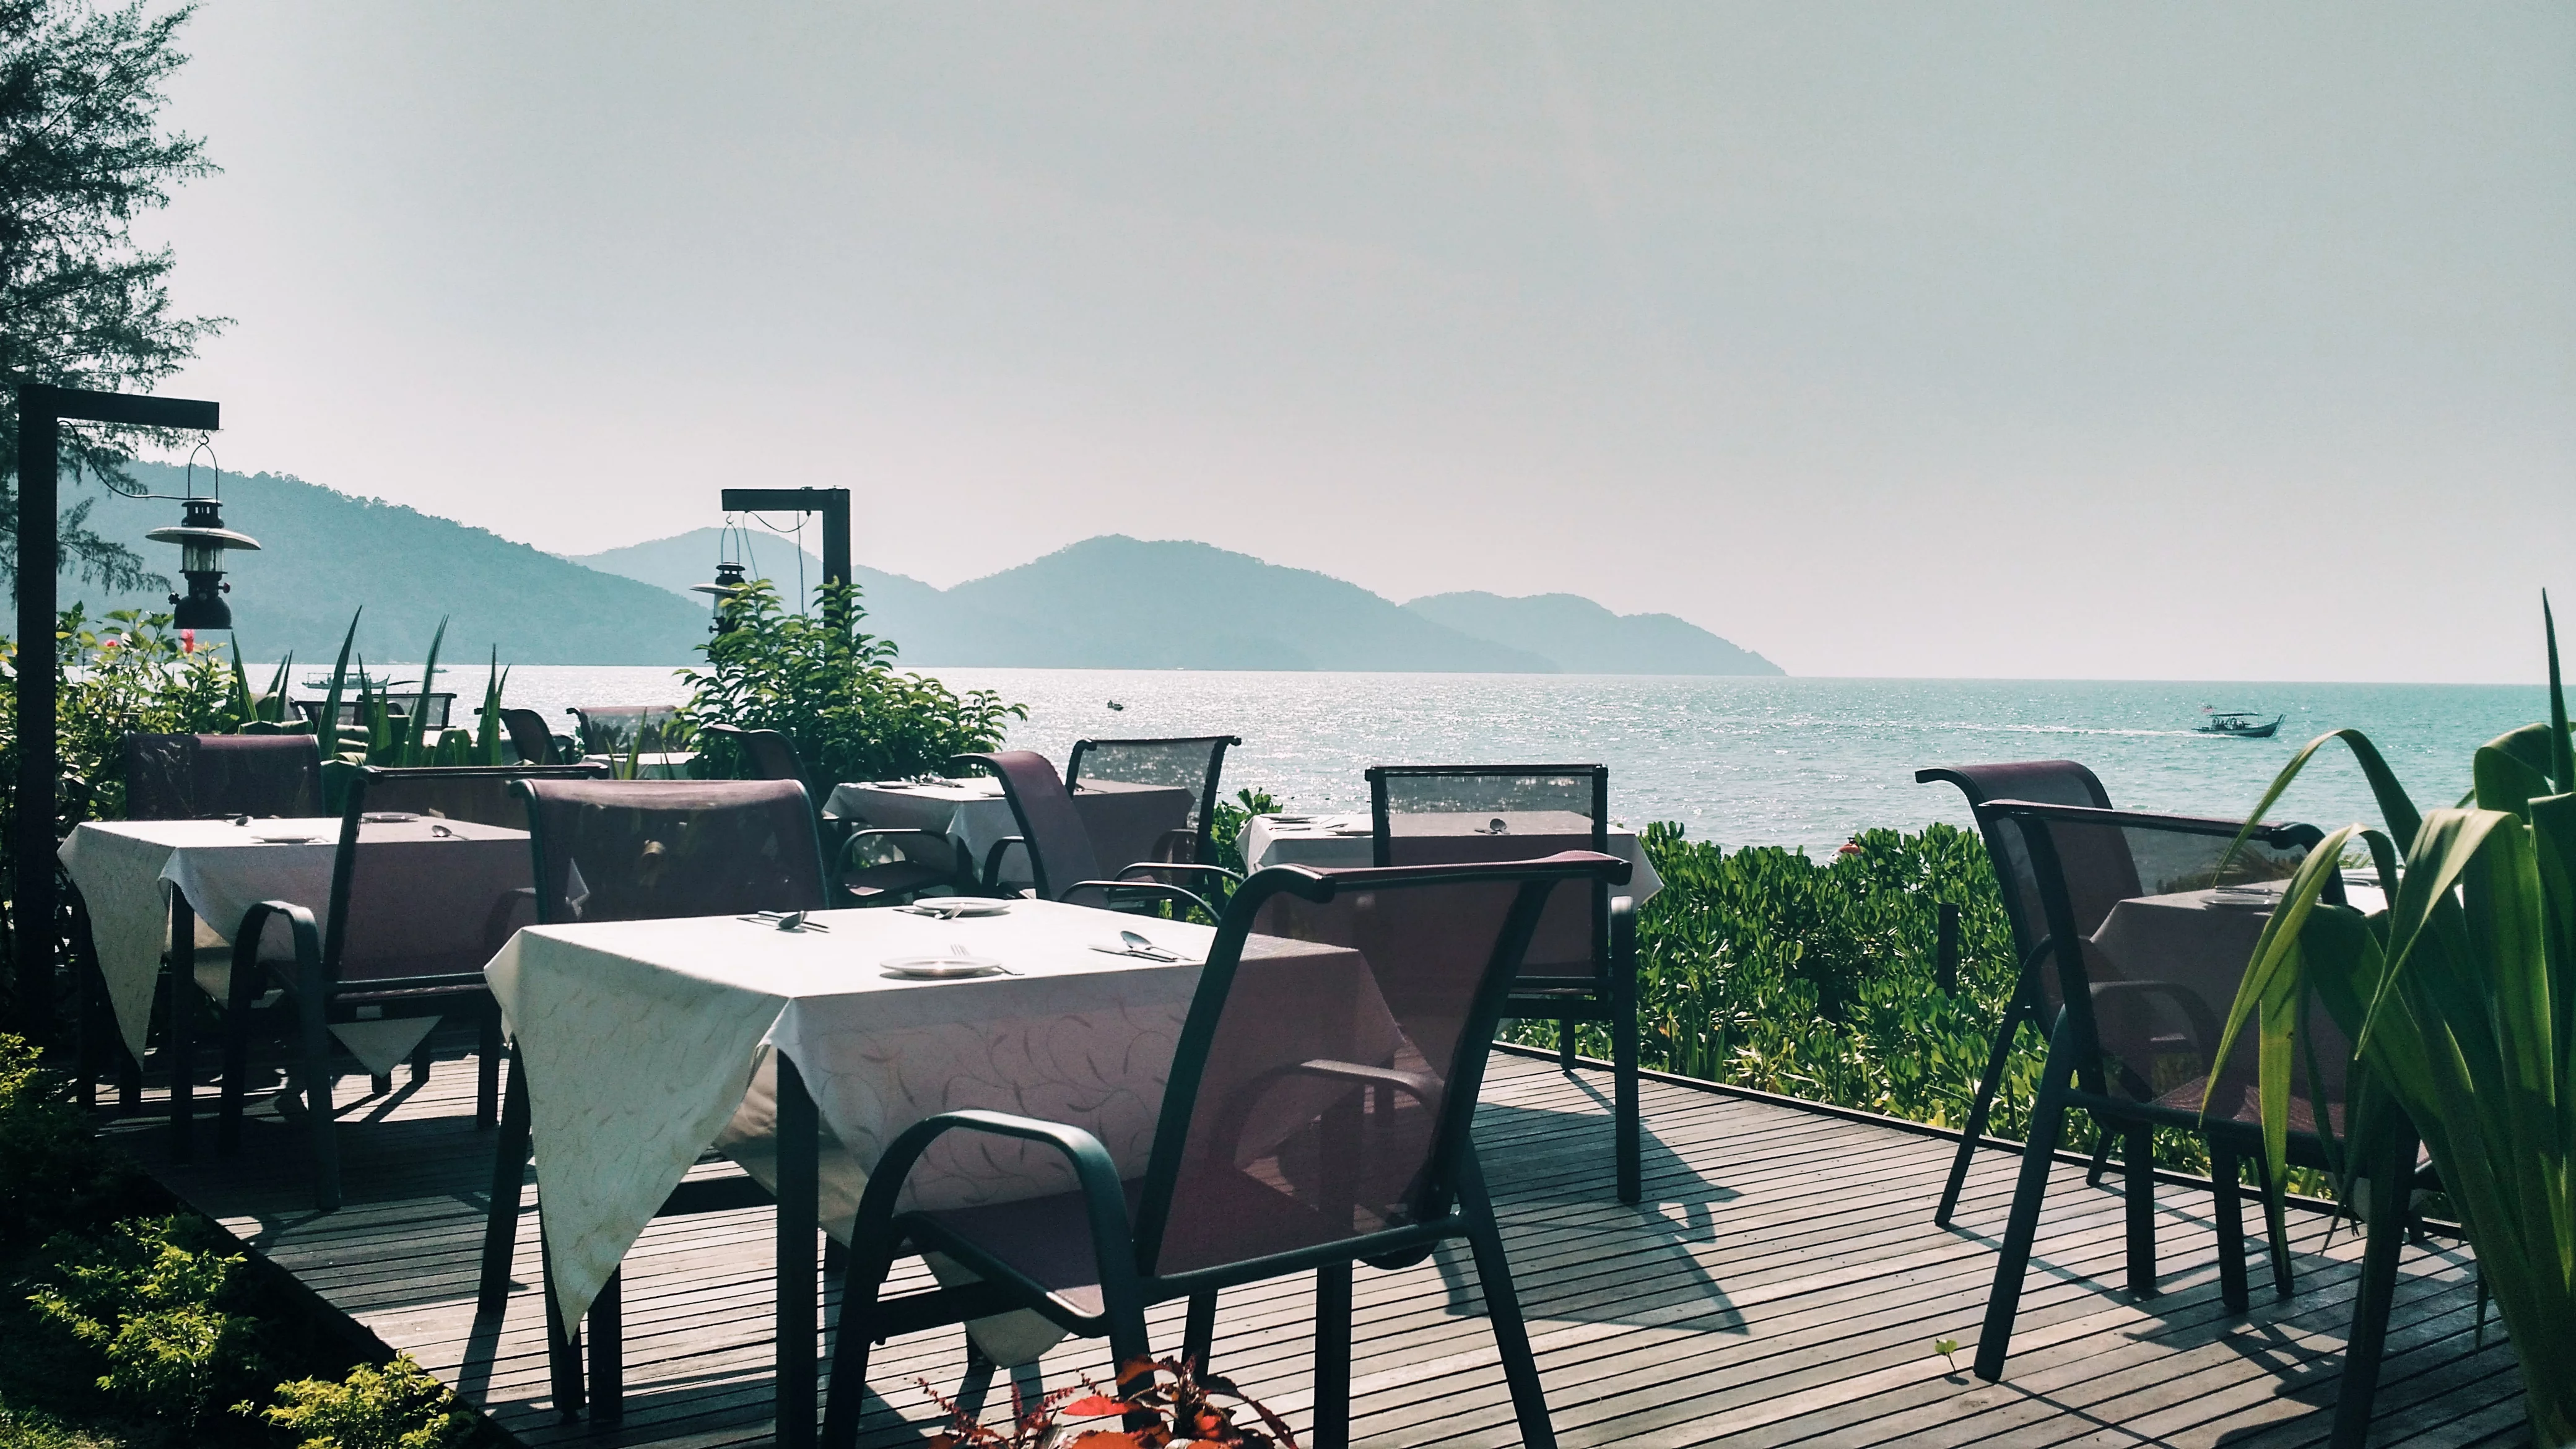 Dine next to the amazing sea views of Batu Ferringhi with Uncle Zach by the Beach 